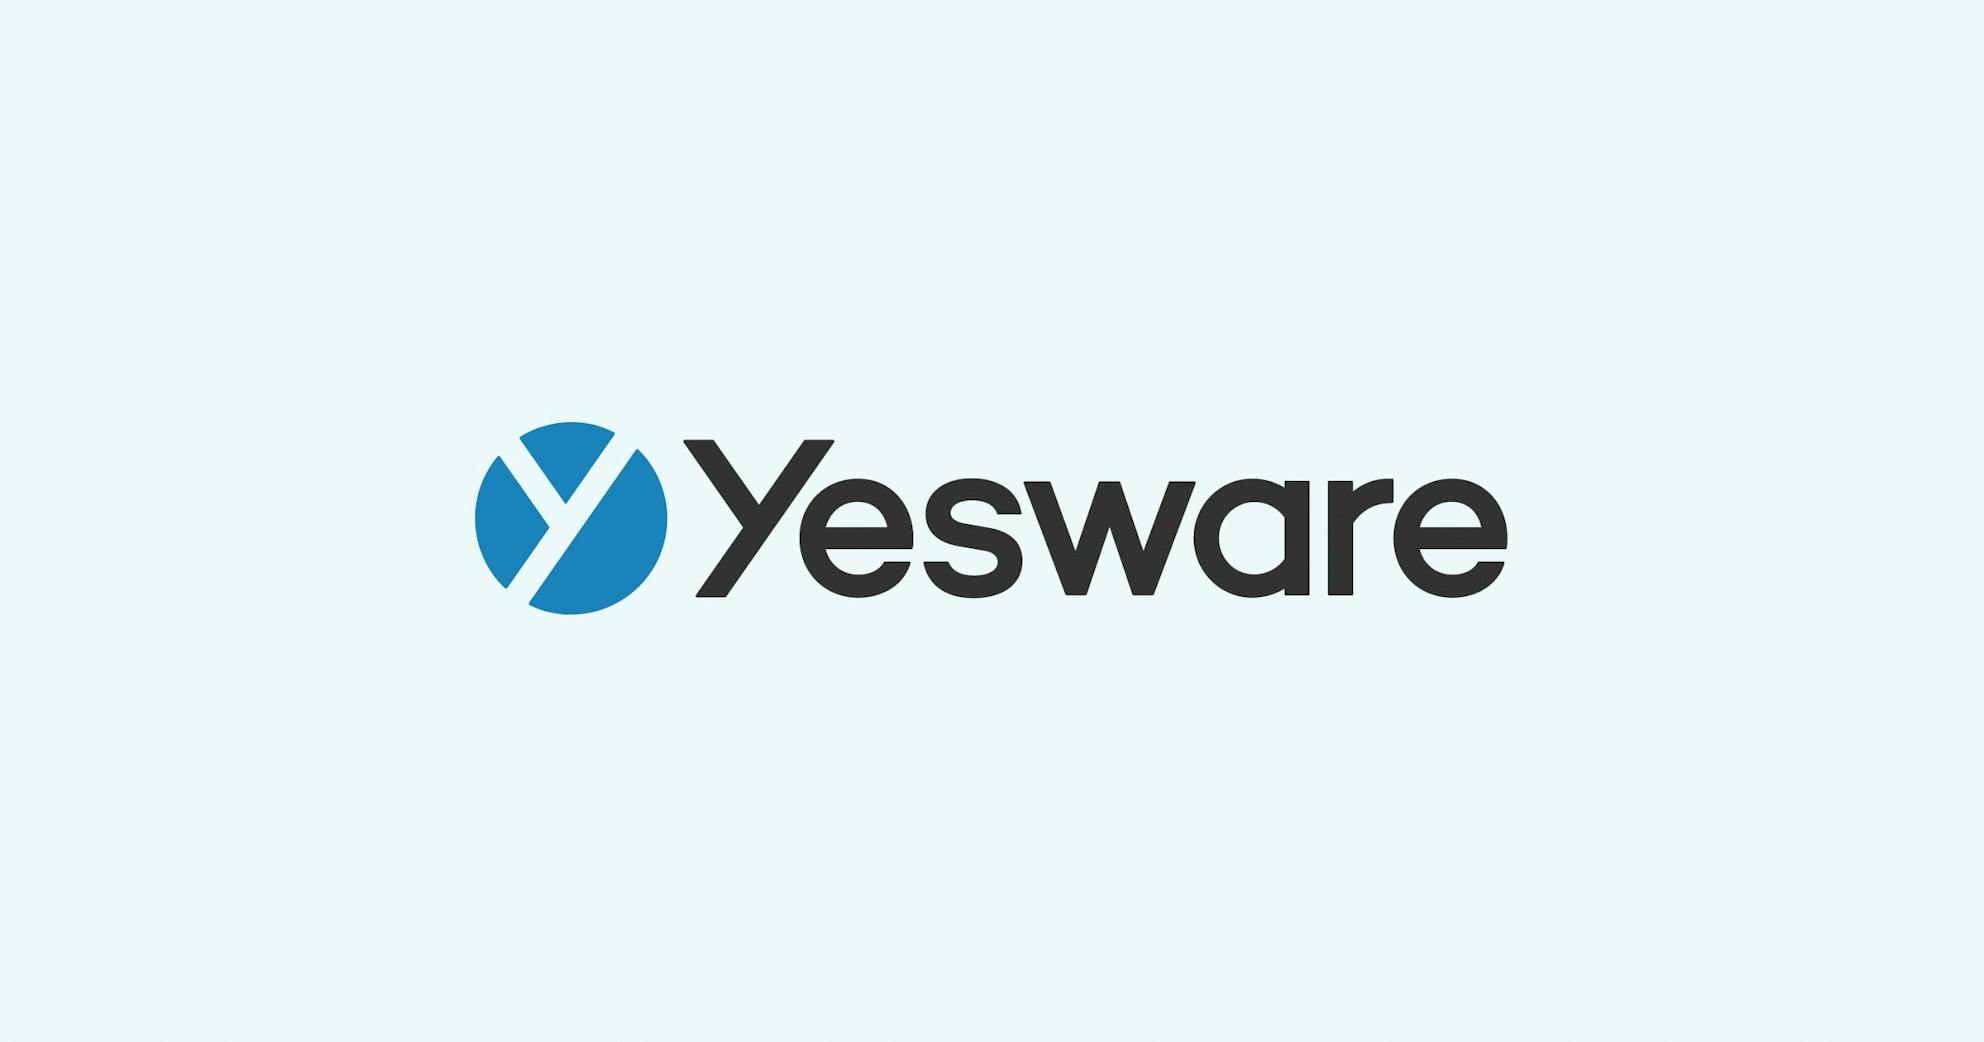 Say Hello to The Yesware Dossier